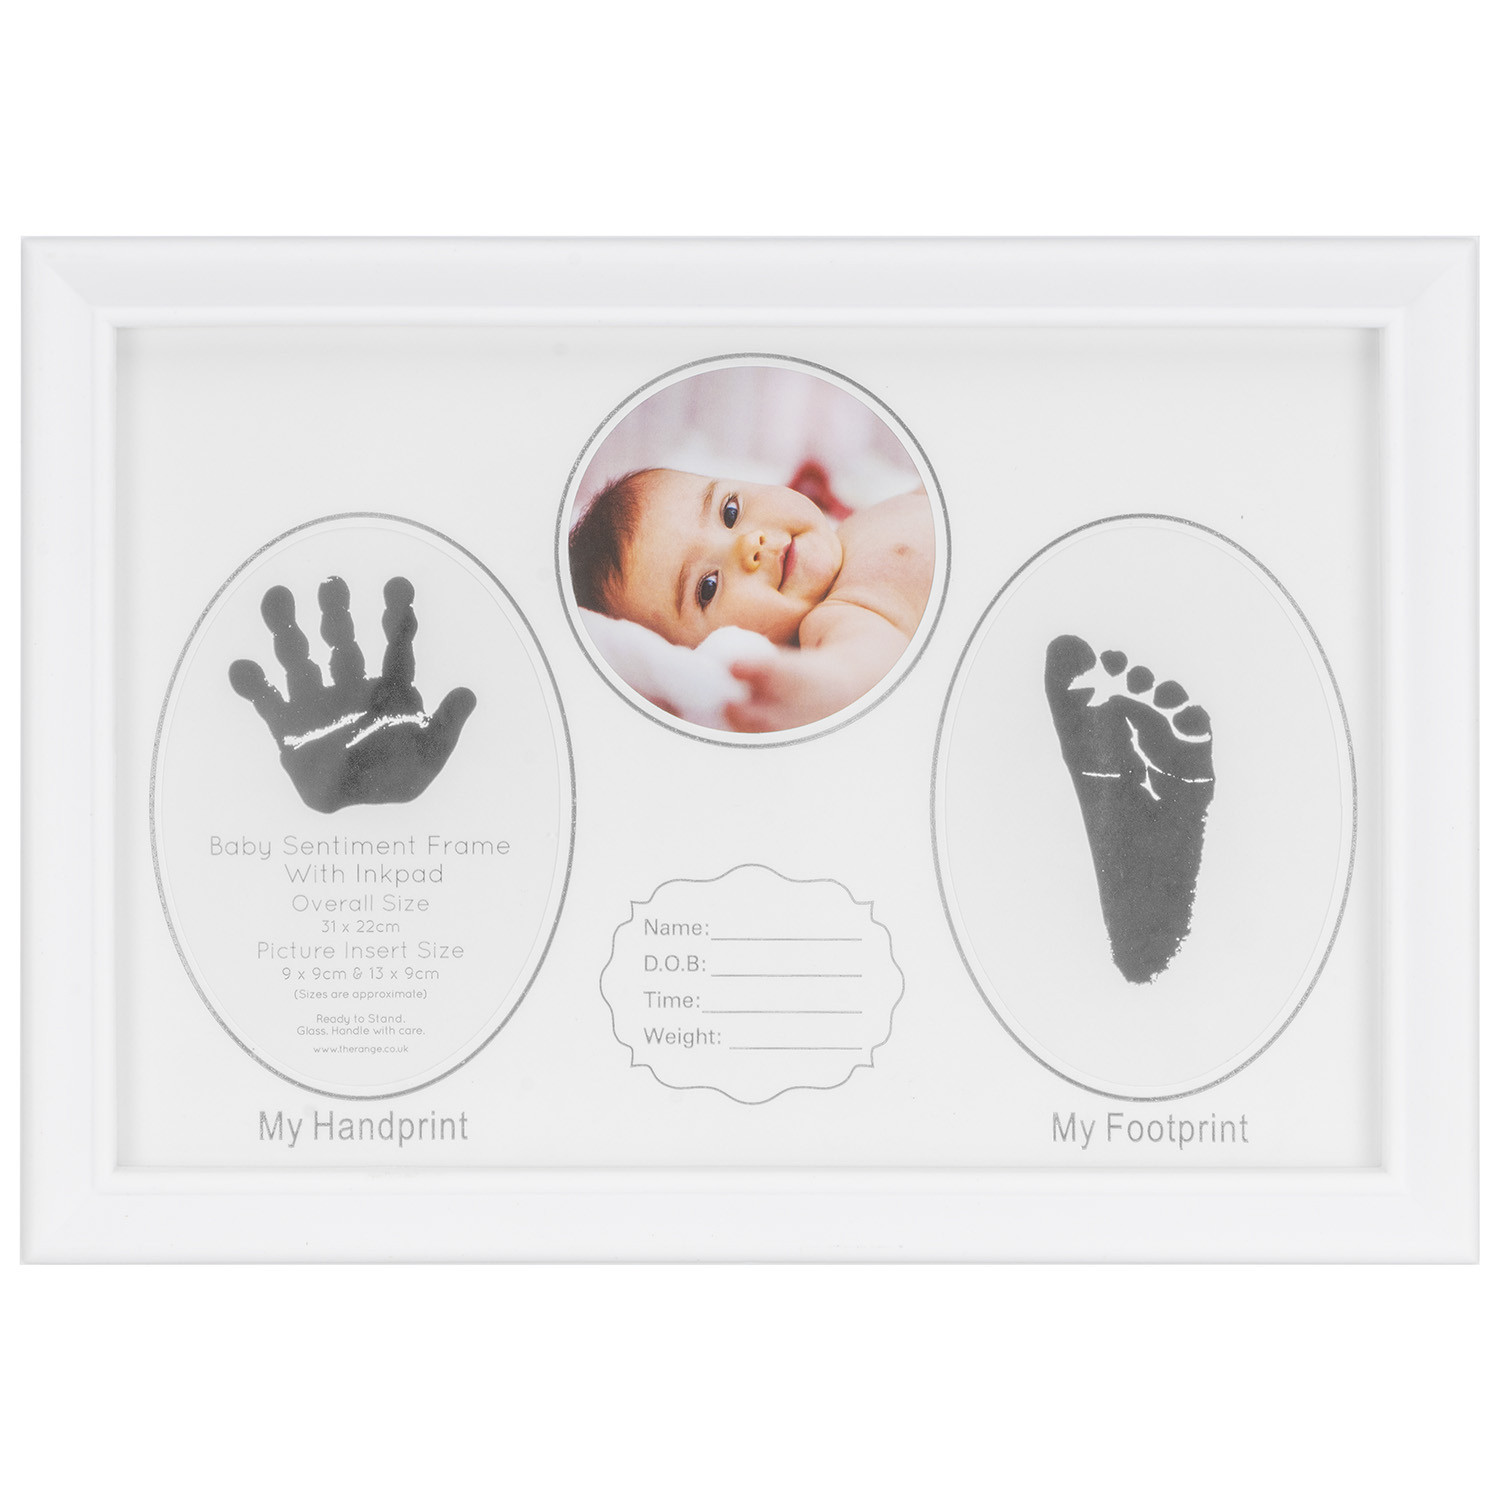 Baby Sentiment White Photo Frame with Inkpad 21 x 31cm Image 2